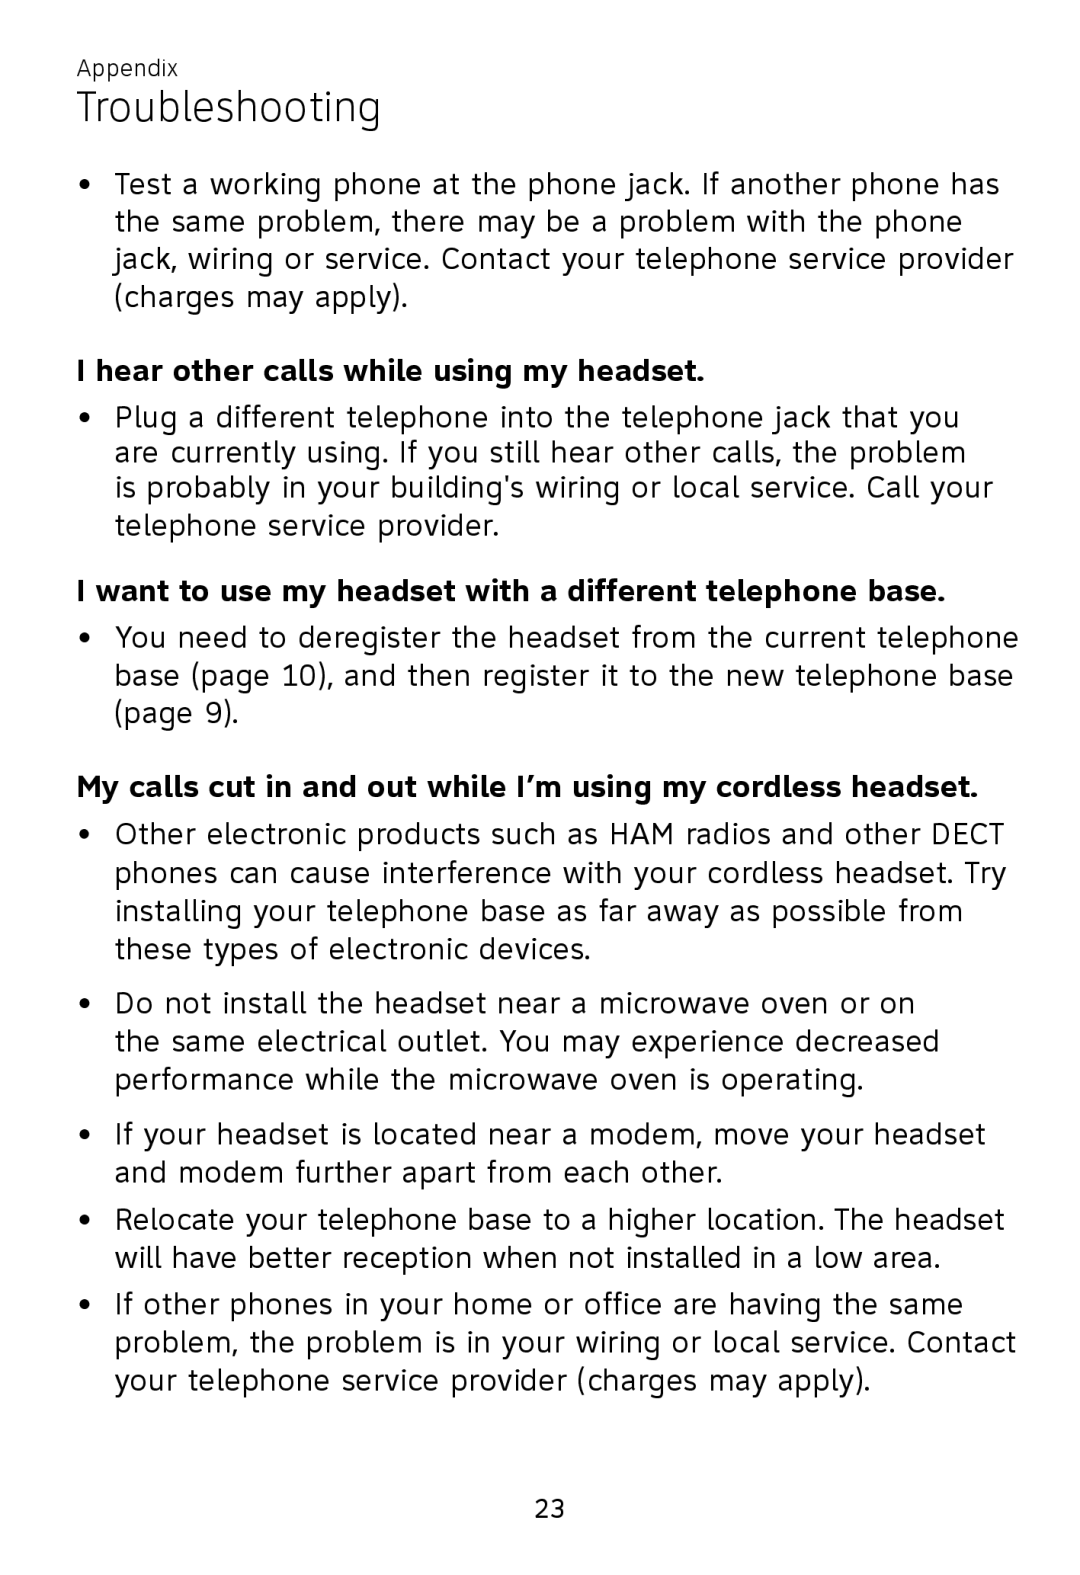 AT&T TL7700 user manual I hear other calls while using my headset, Troubleshooting 